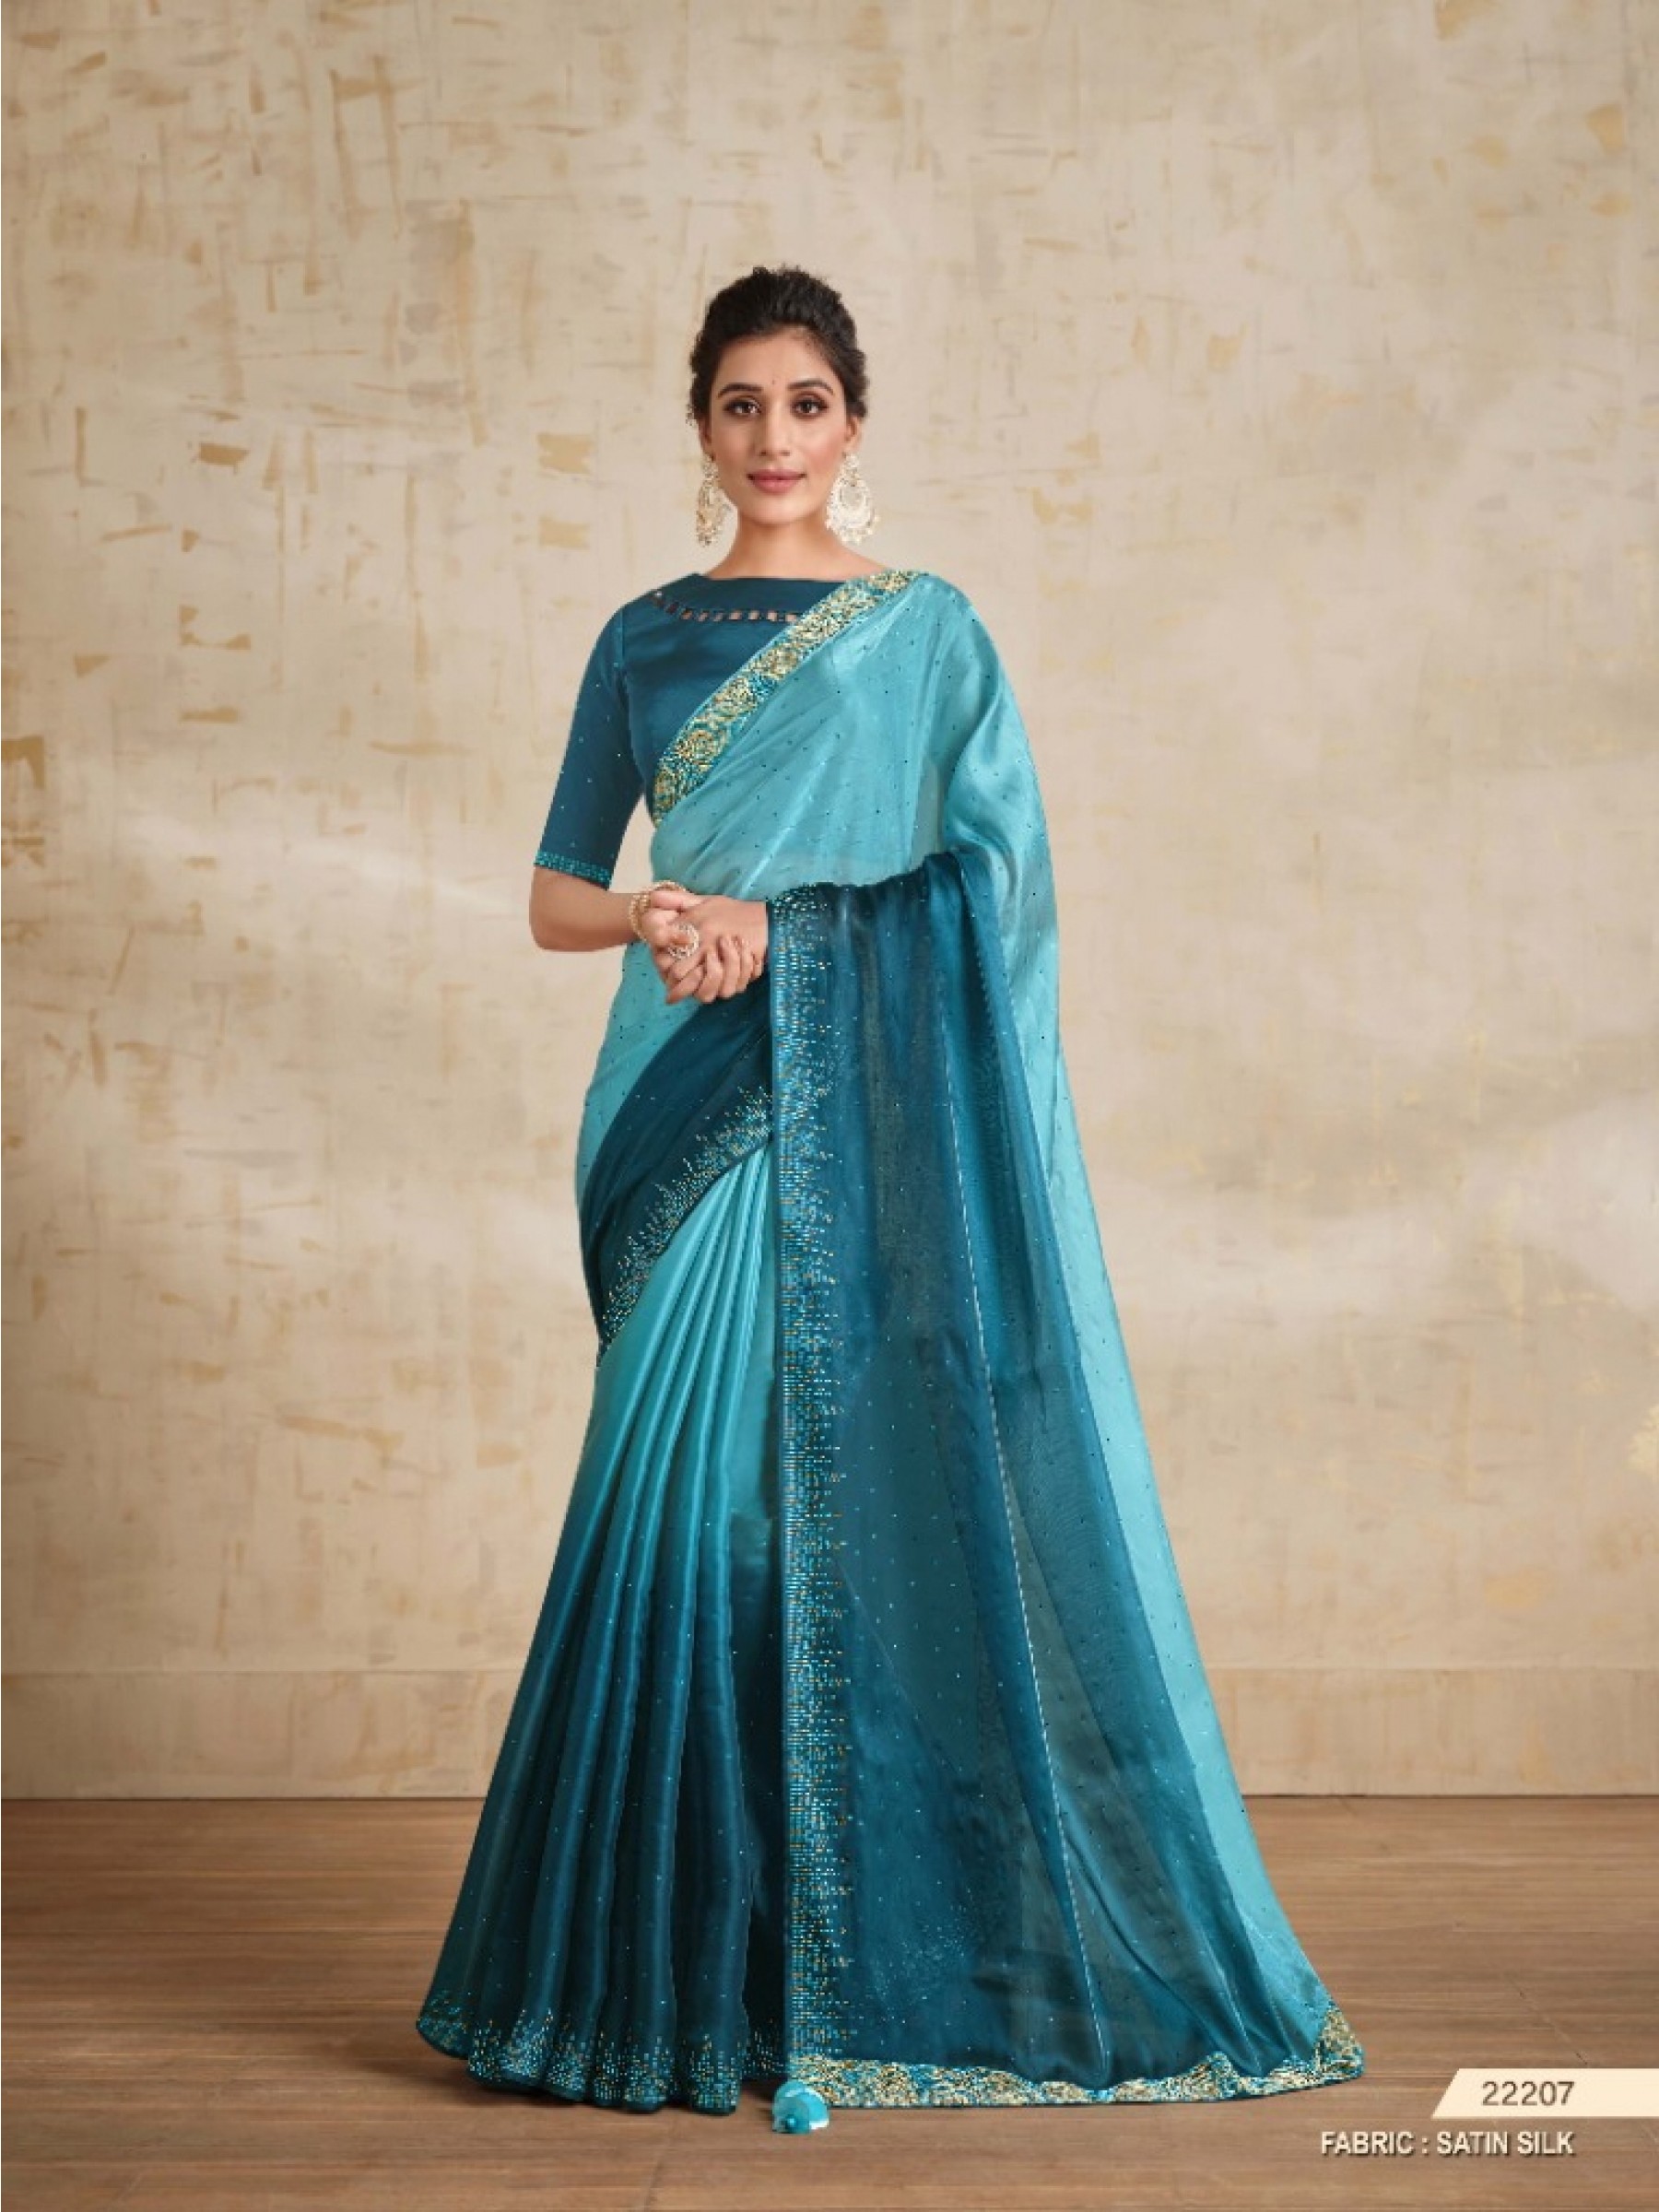 Sateen Silk  Saree In Blue Color With Embroidery Work